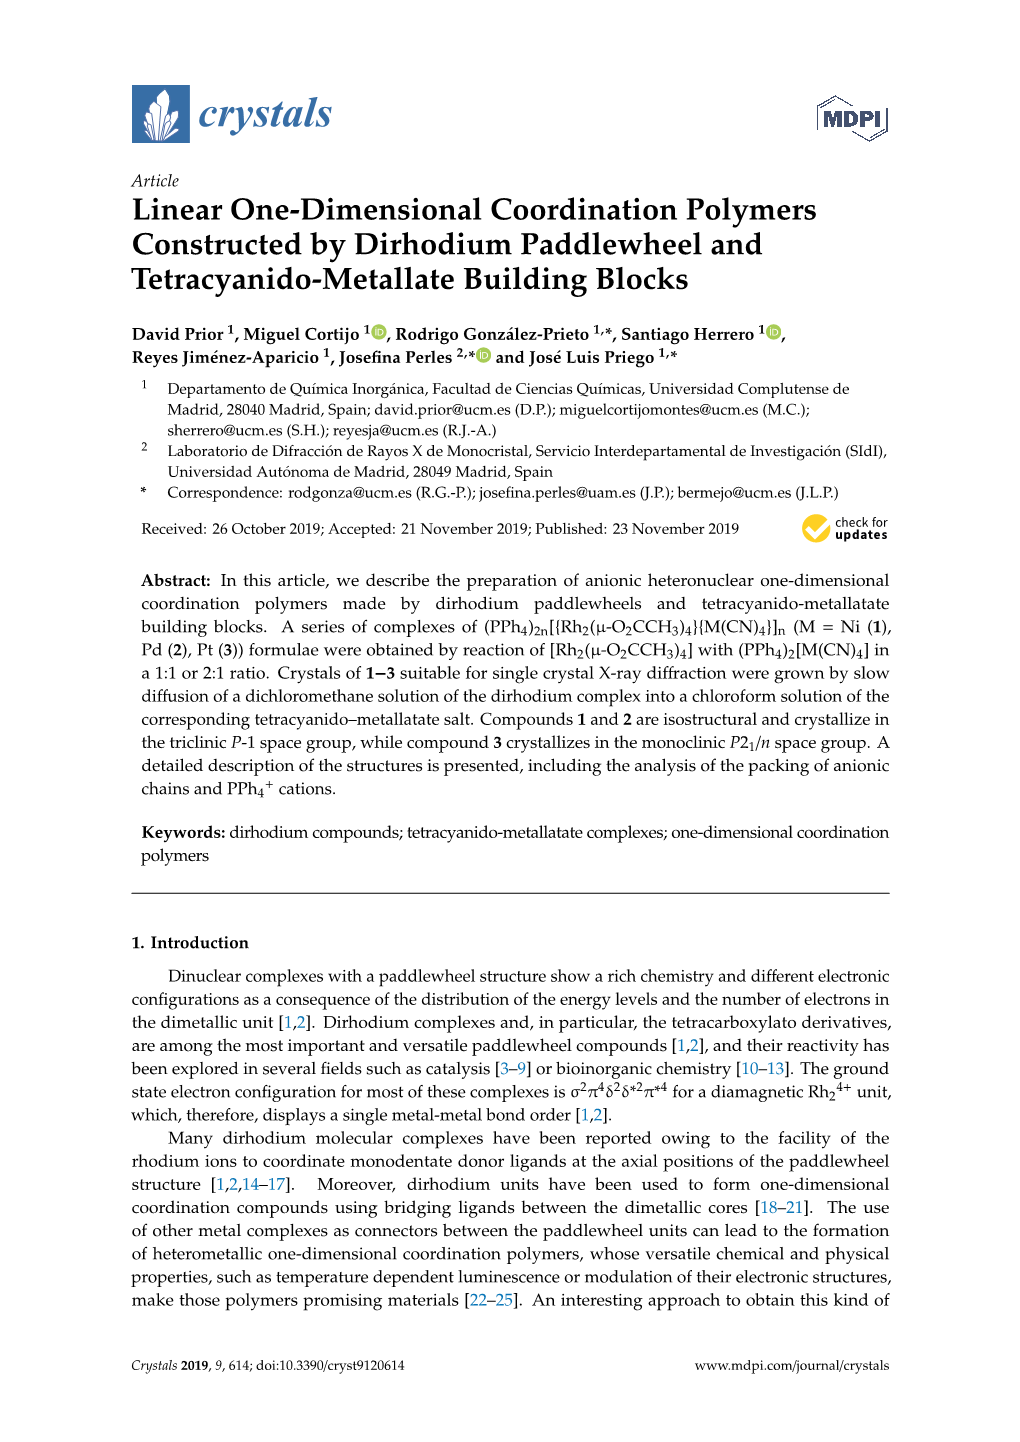 Linear One-Dimensional Coordination Polymers Constructed by Dirhodium Paddlewheel and Tetracyanido-Metallate Building Blocks